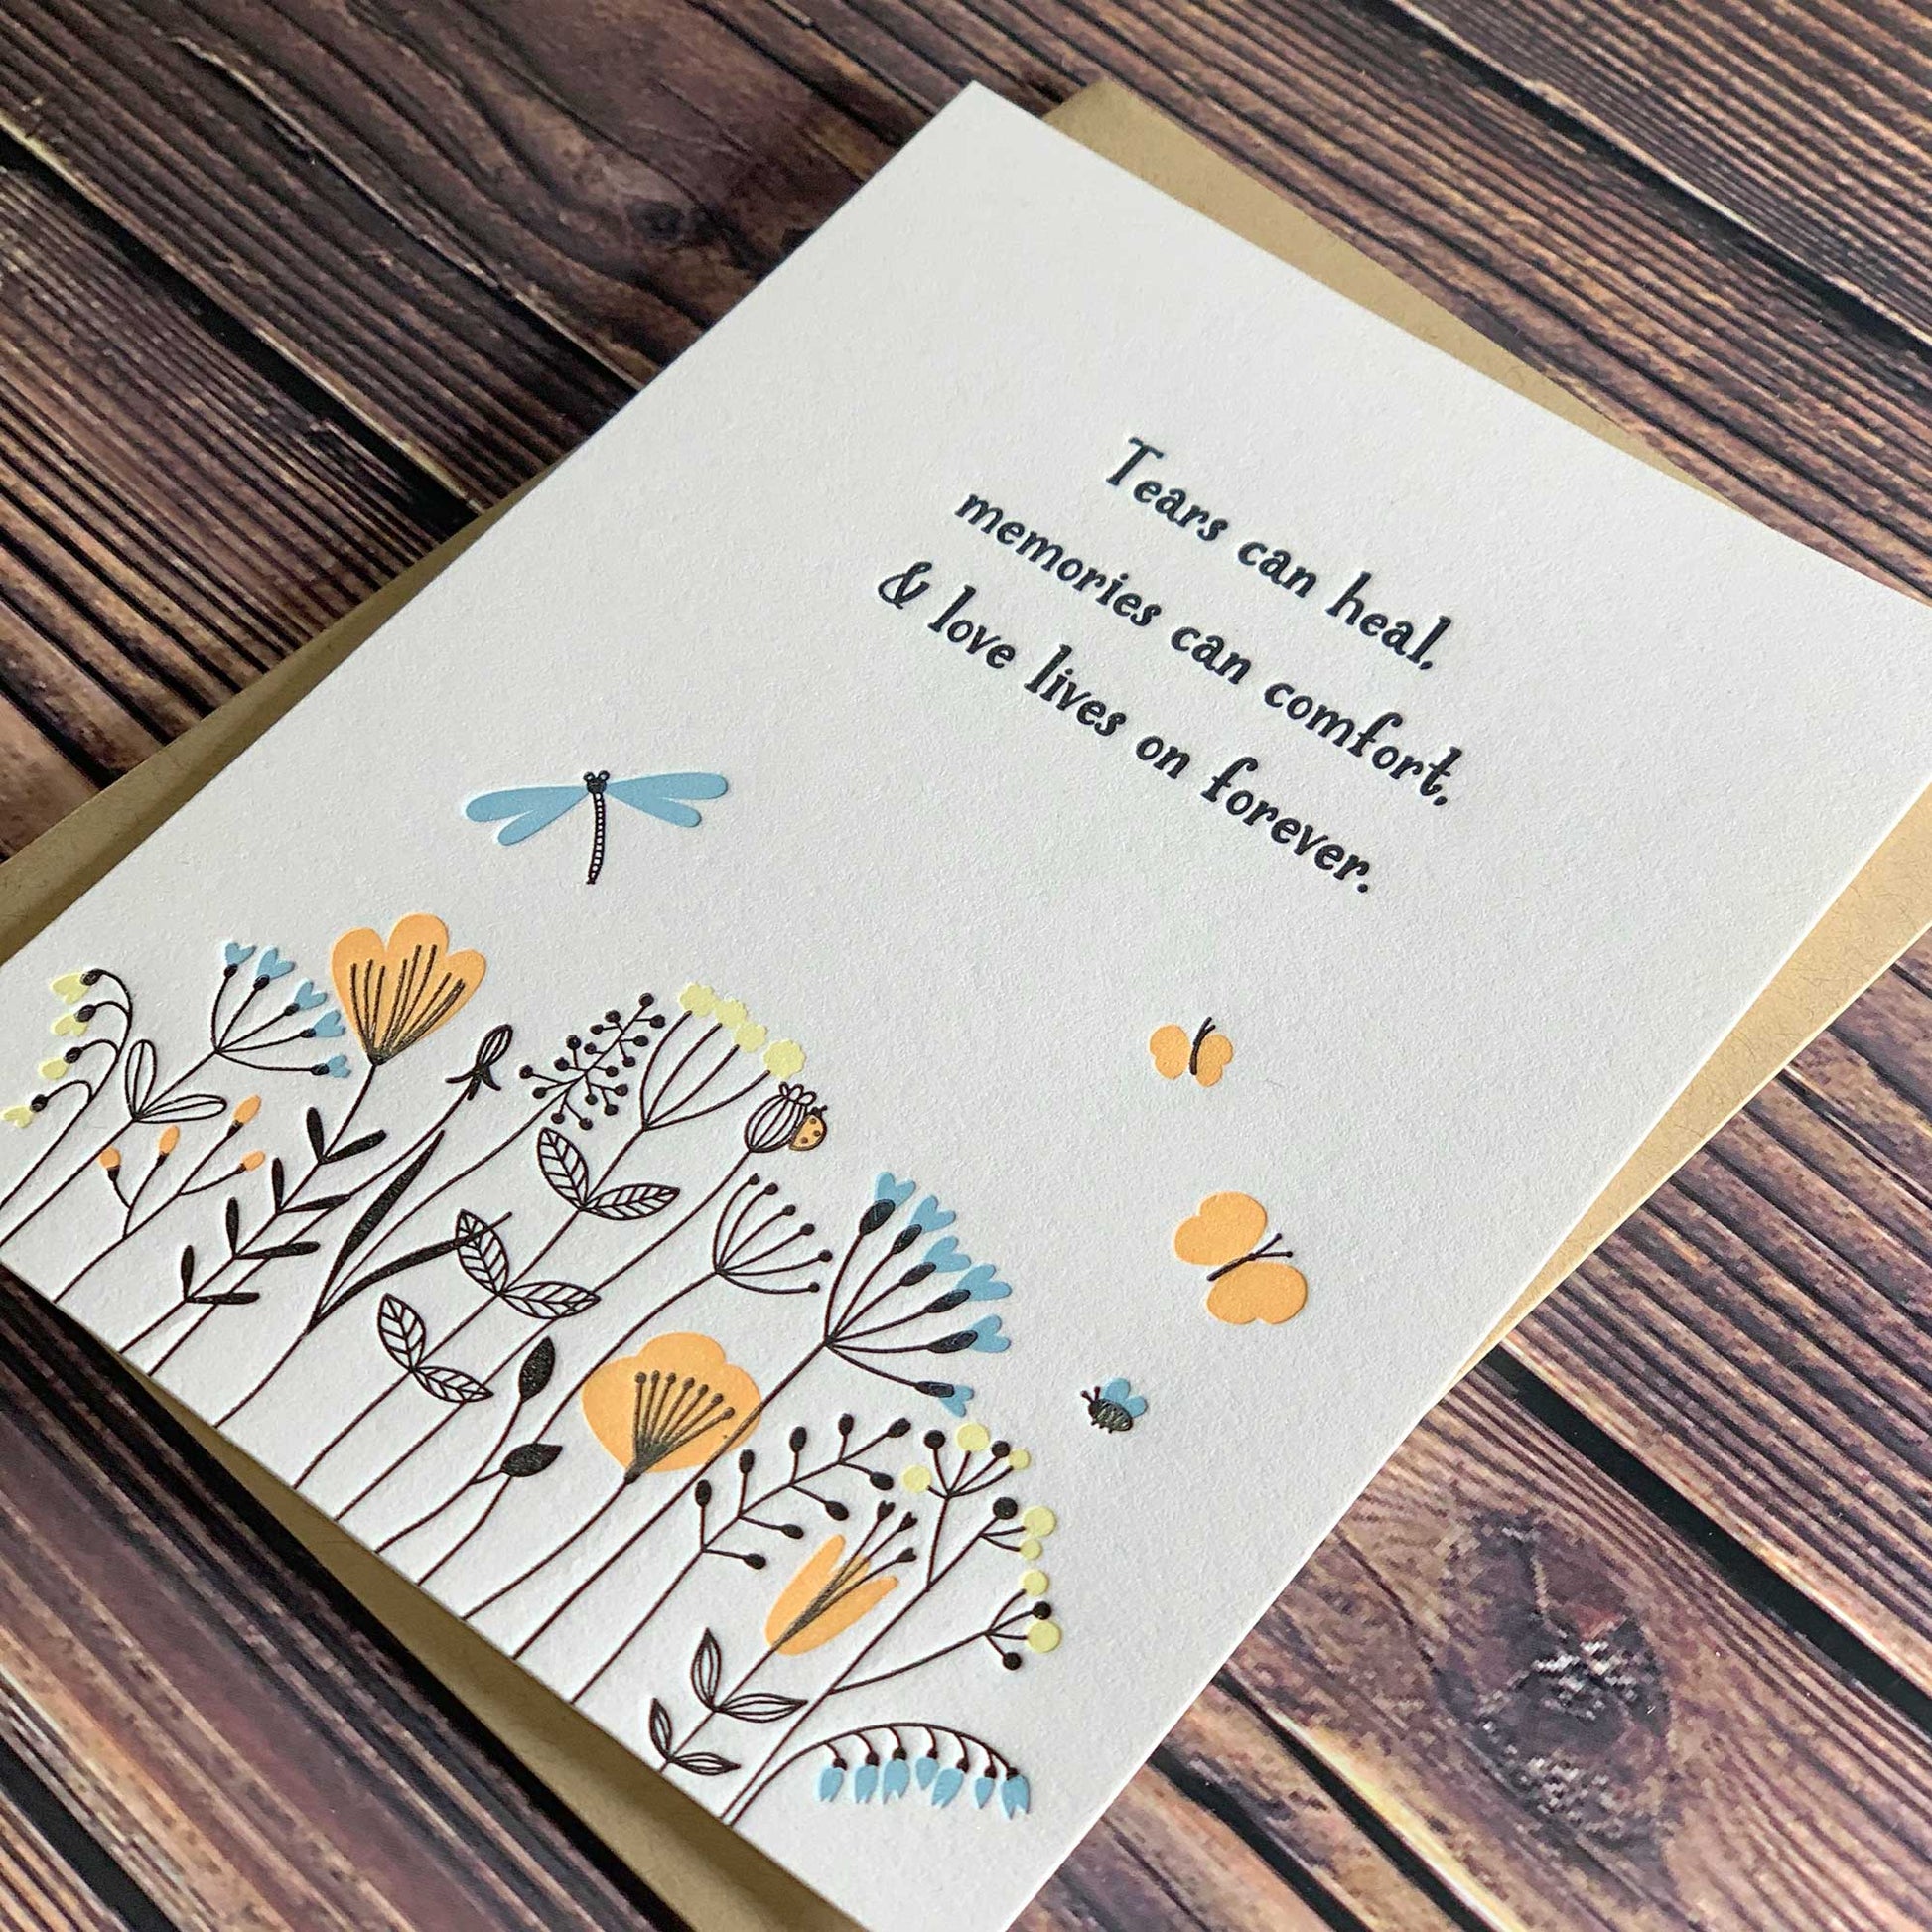 Tears can heal, memories can comfort, and love lives on forever, sympathy and condolence card, wildflowers and butterflies, Letterpress printed, view shows letterpress impression, includes envelope